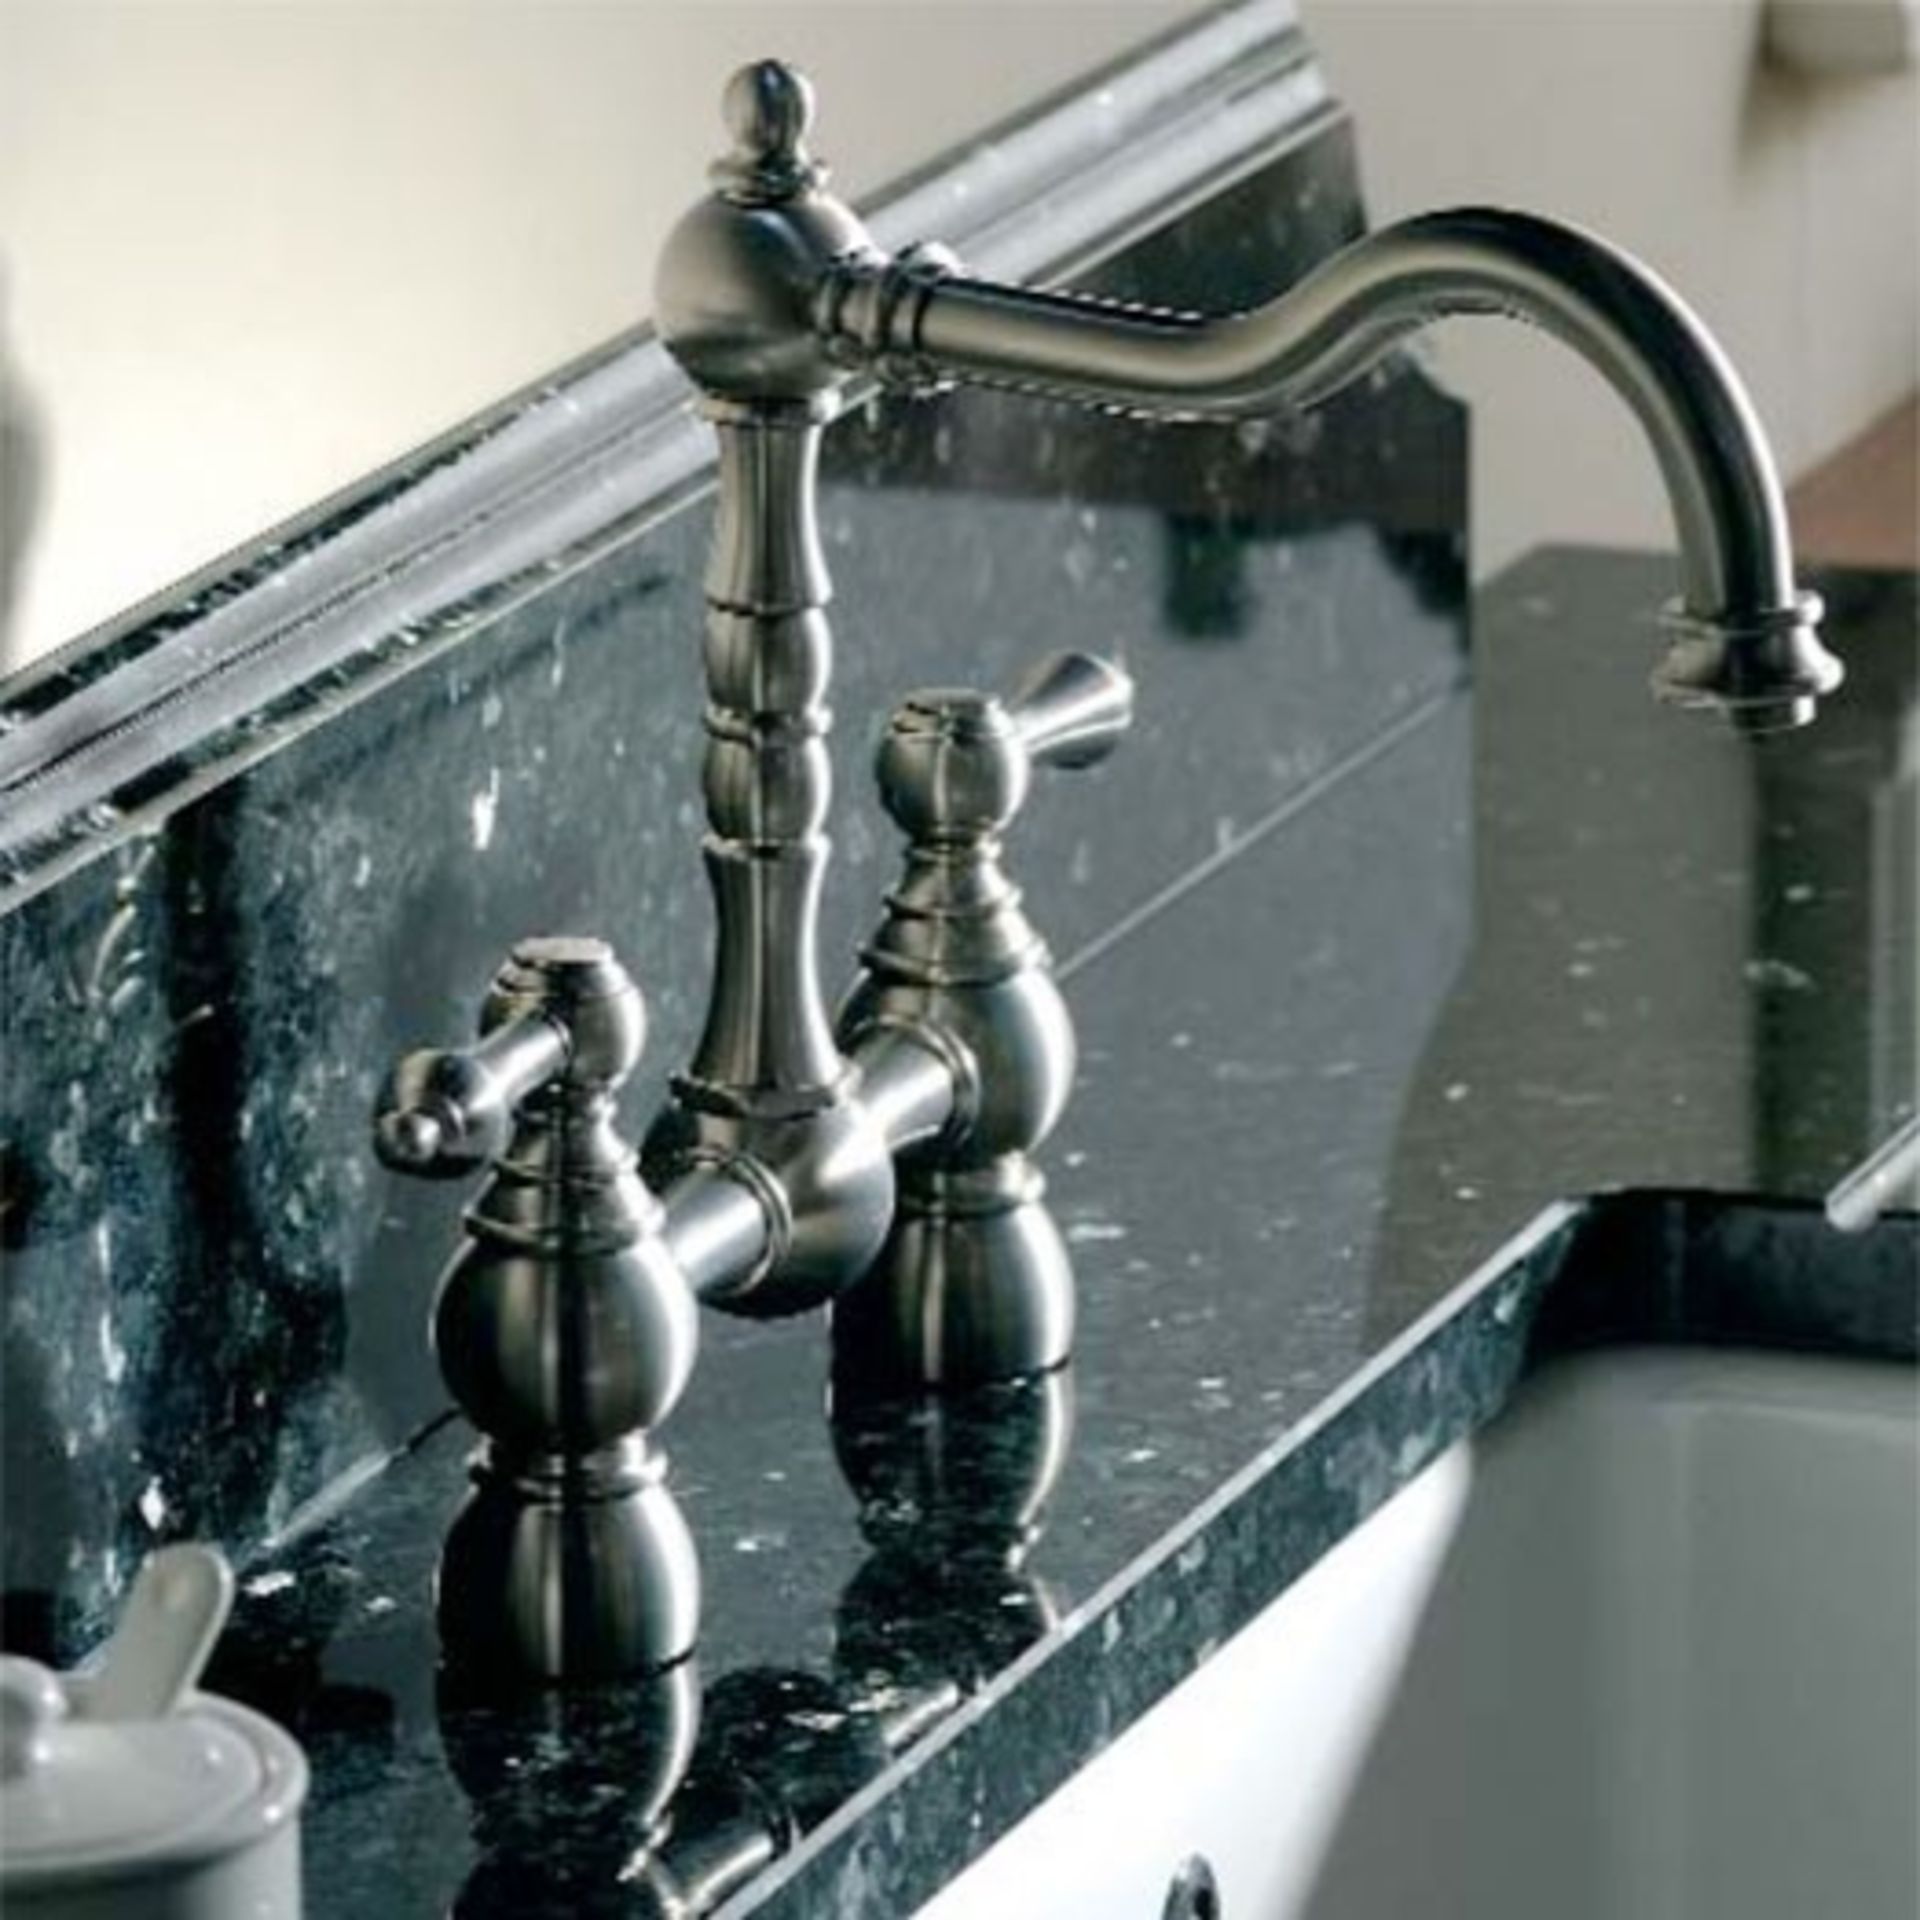 New (Aa94) Abode Bayenne Bridge Mixer Tap. RRP £406. Product Features The Abode At3034 Bayen...